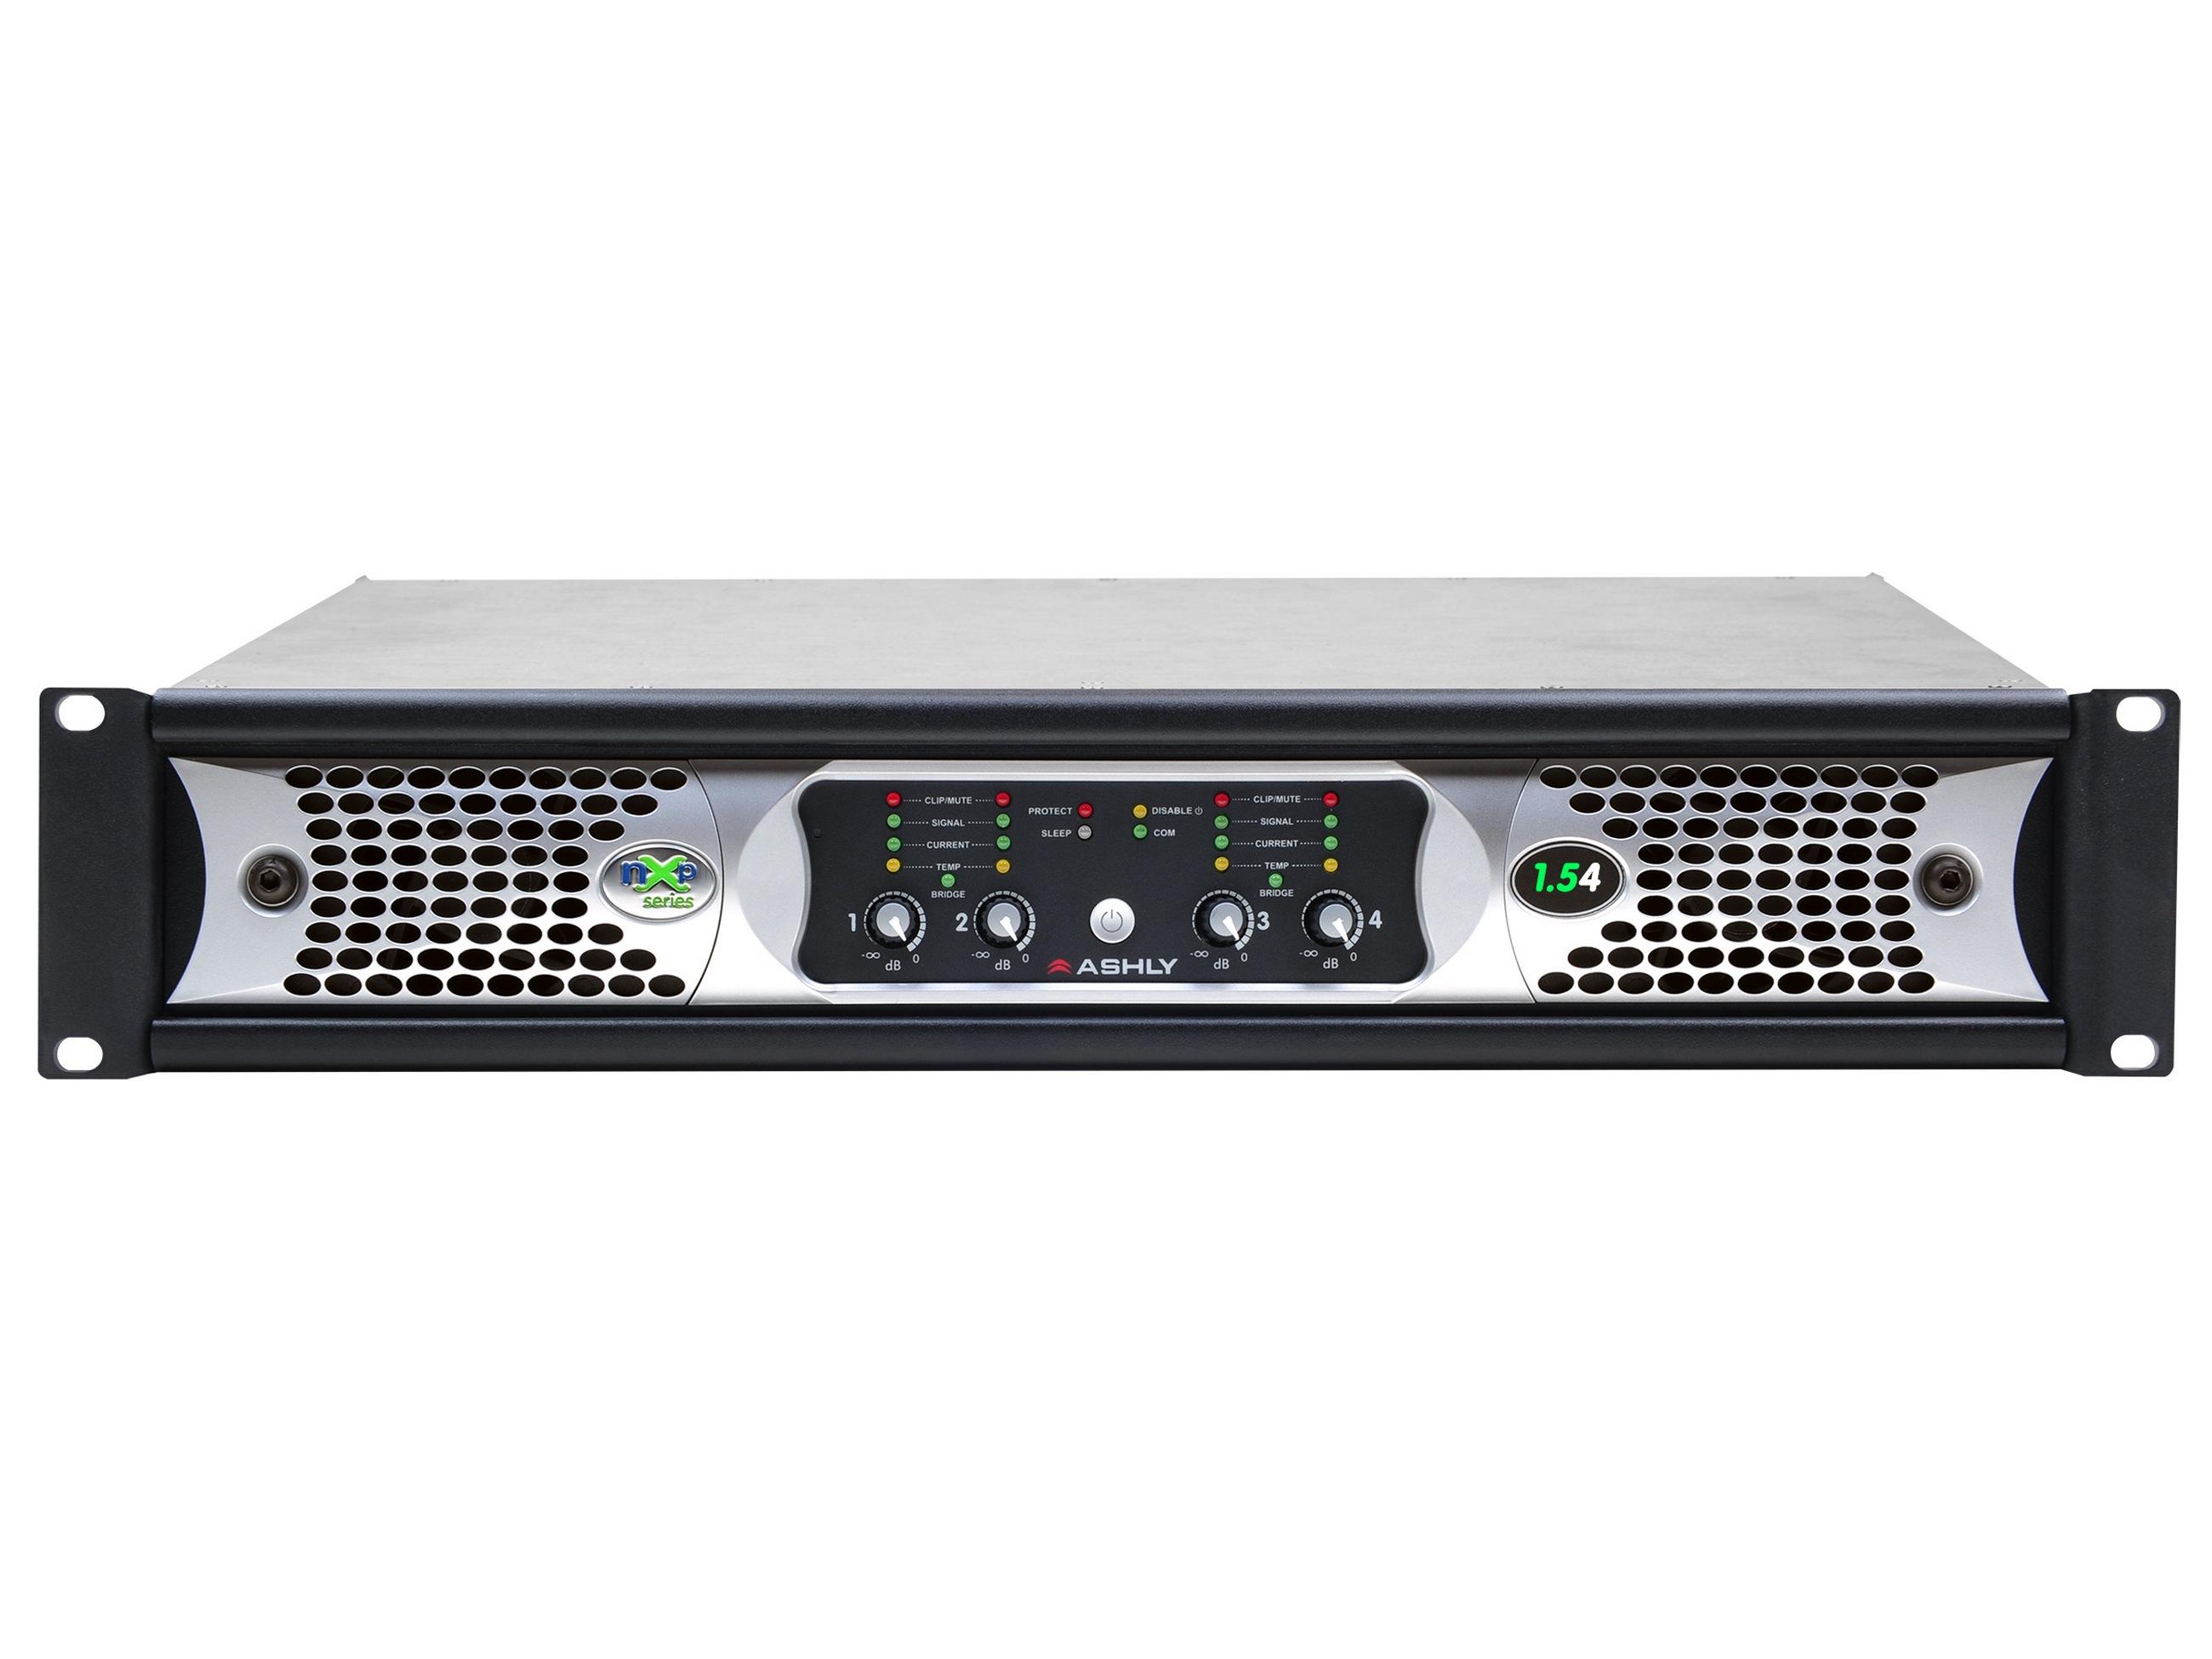 nXp1.54d 4x 1500 Watts/2 Ohms Network Power Amplifier with Protea DSP and OPDante Option Card by Ashly